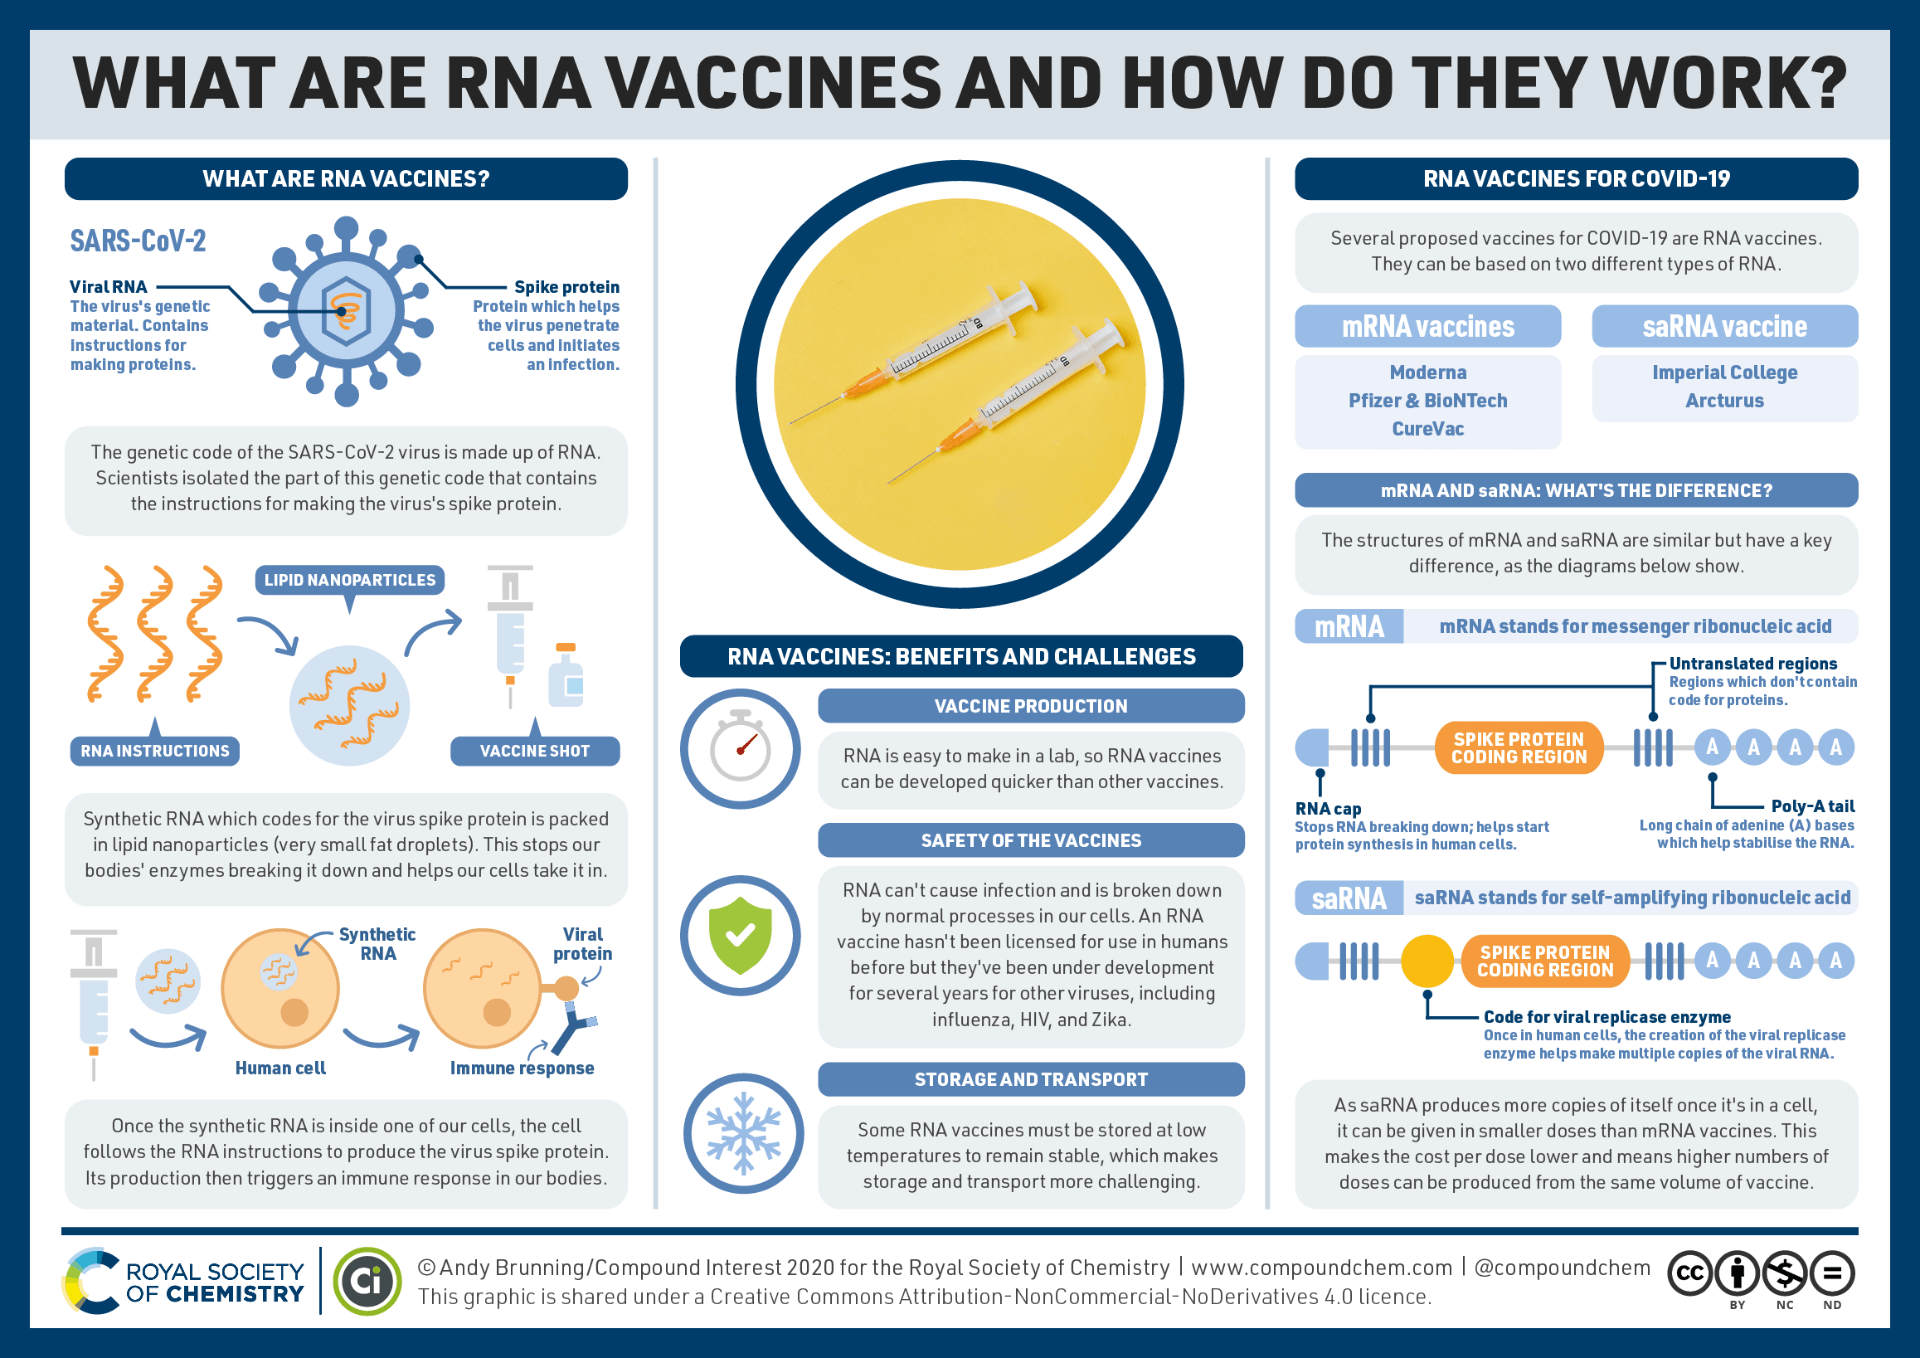 RNA vaccines and how they work